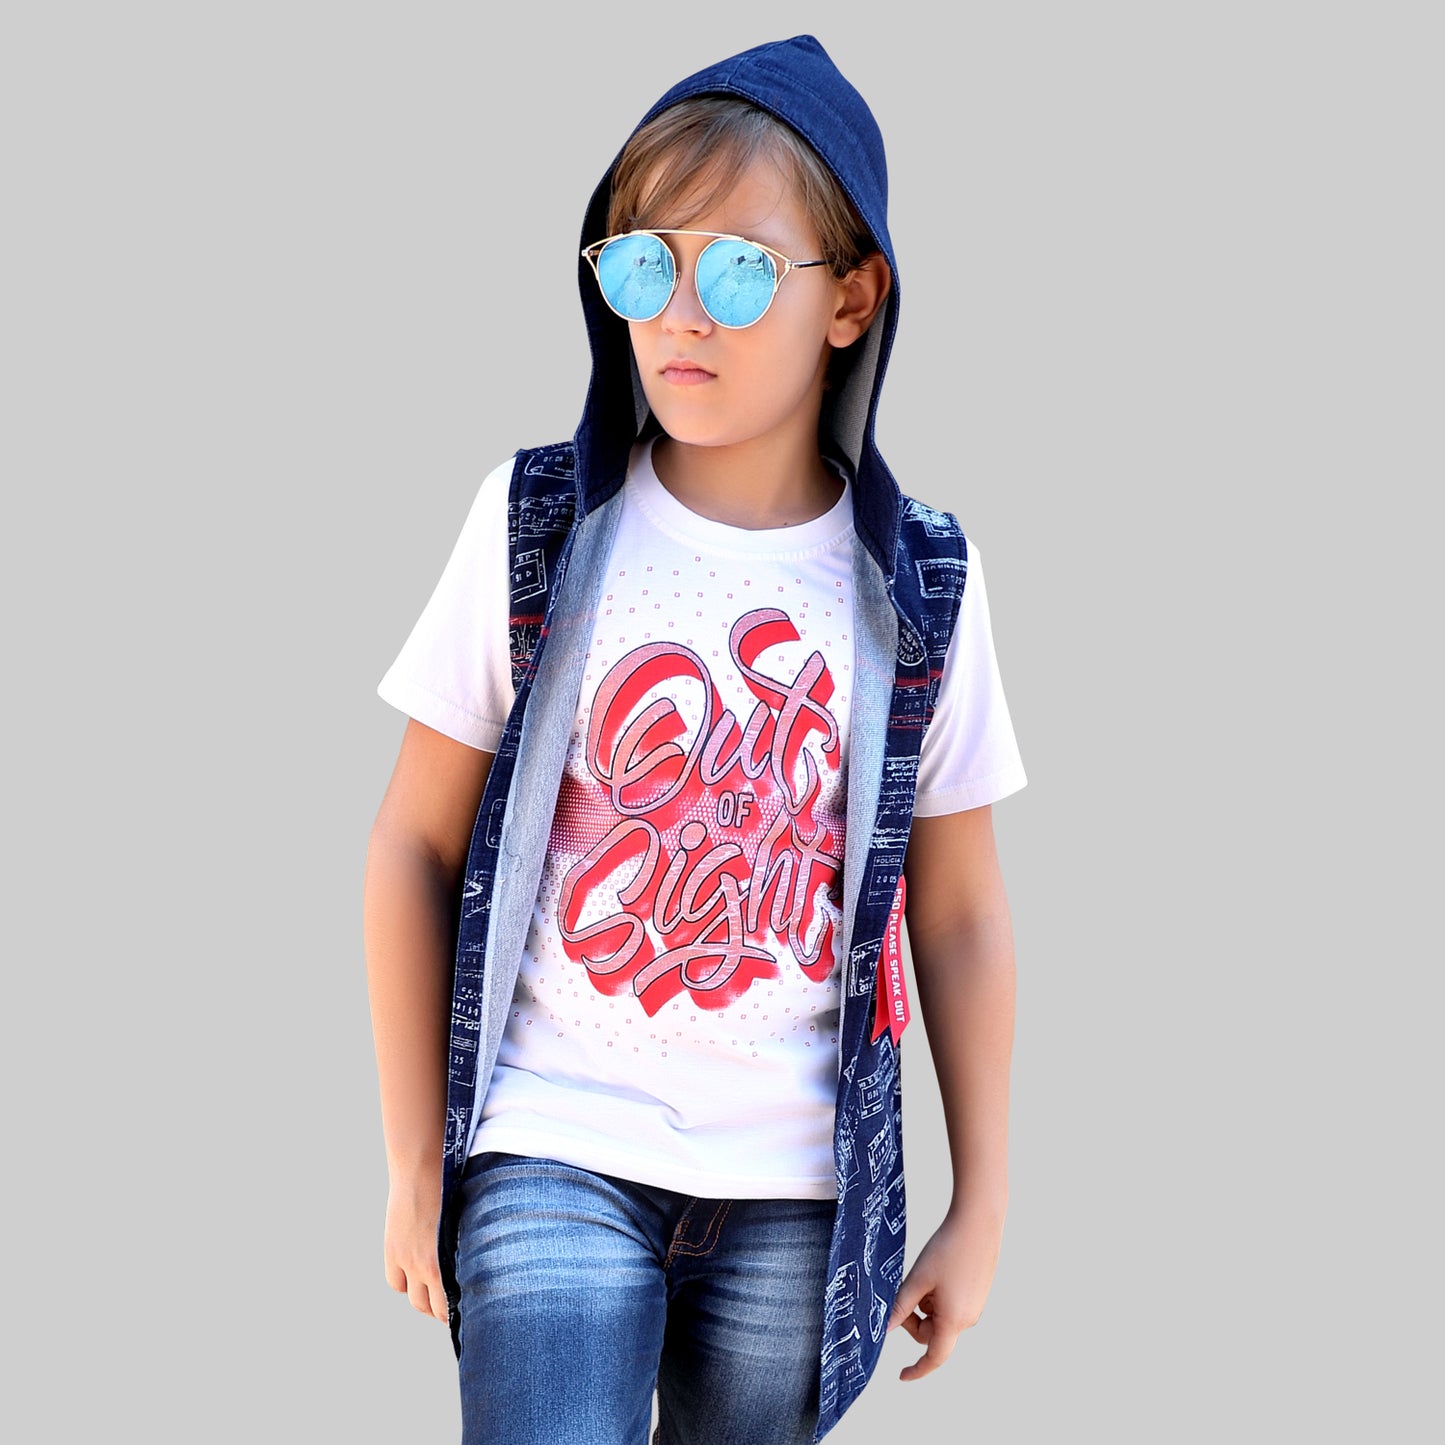 MashUp Casual outdoor Outfit with jacket shirt and tshirt